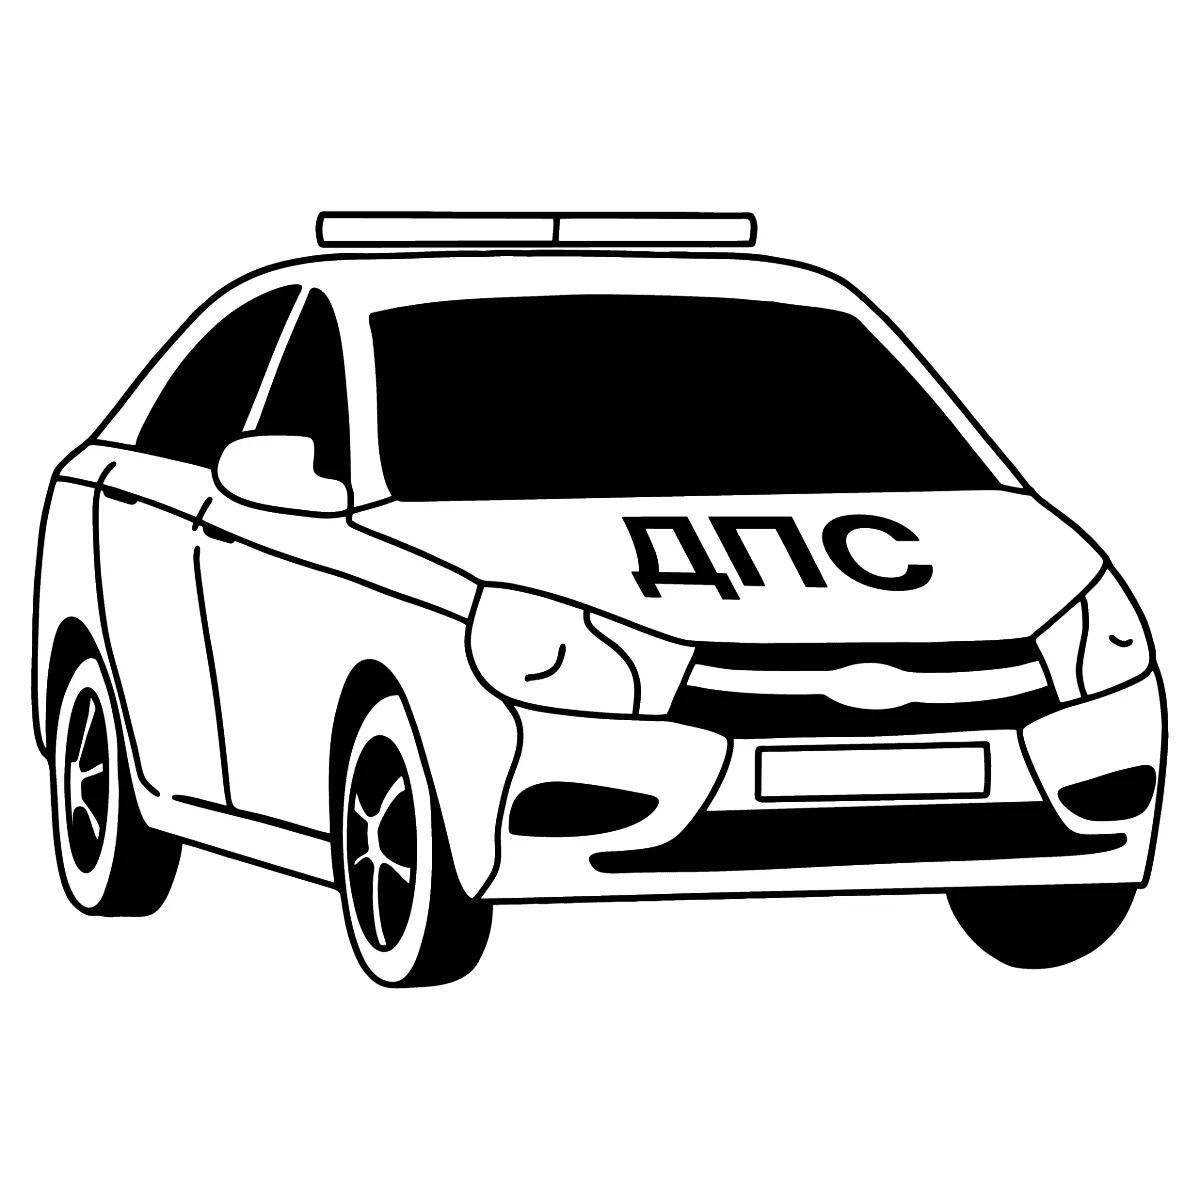 Coloring page dazzling police car